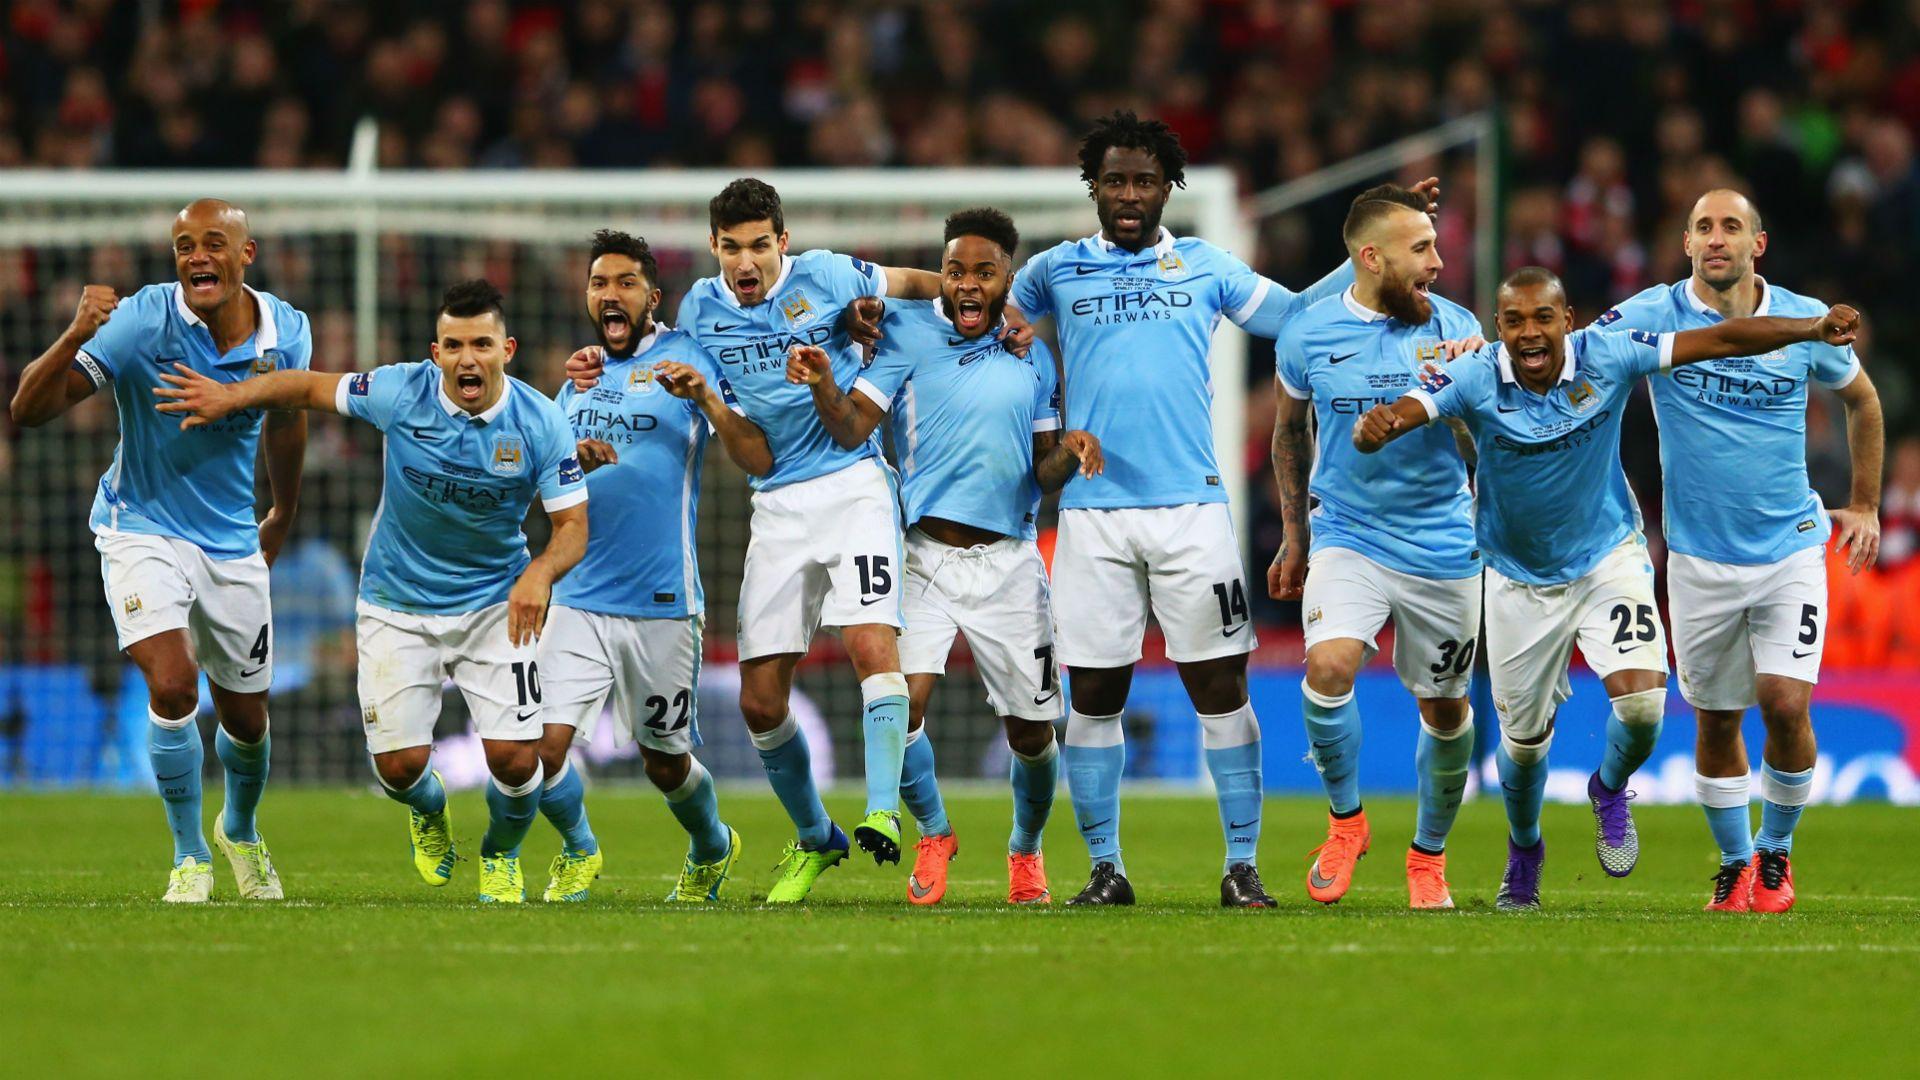 Manchester City Team After Players Wallpaper Desktop HD For Victory